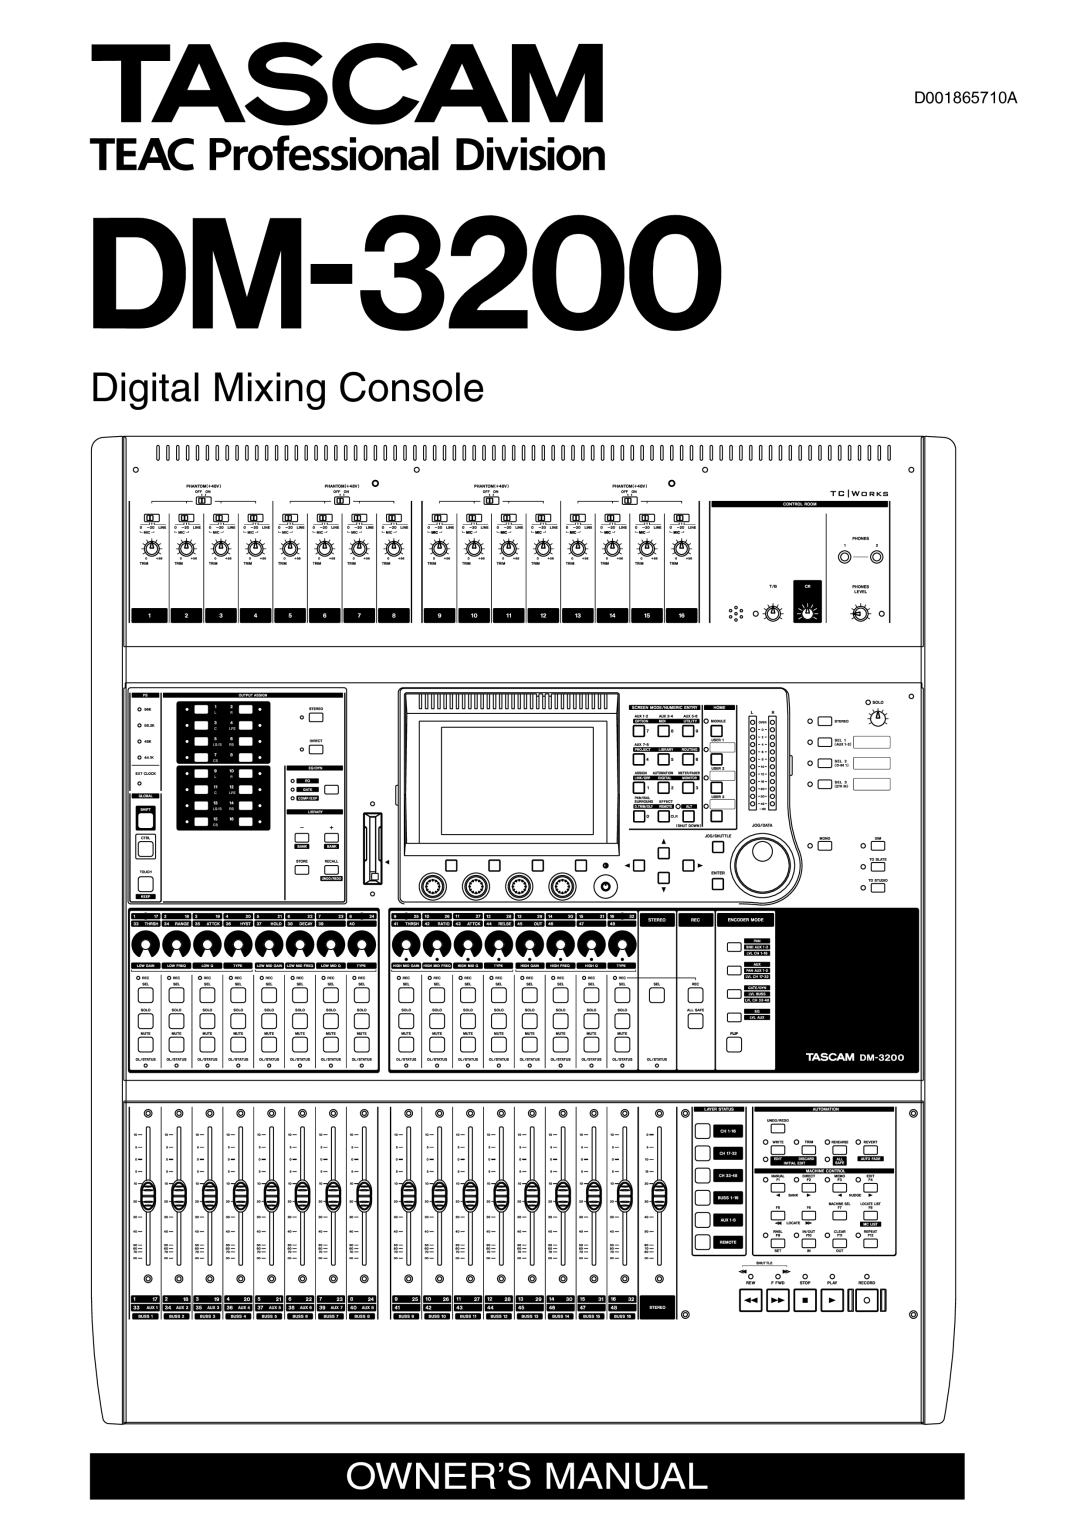 Tascam manual Making EQ settings, Setting up and using monitoring, » DM-3200 Quick Reference Introduction 